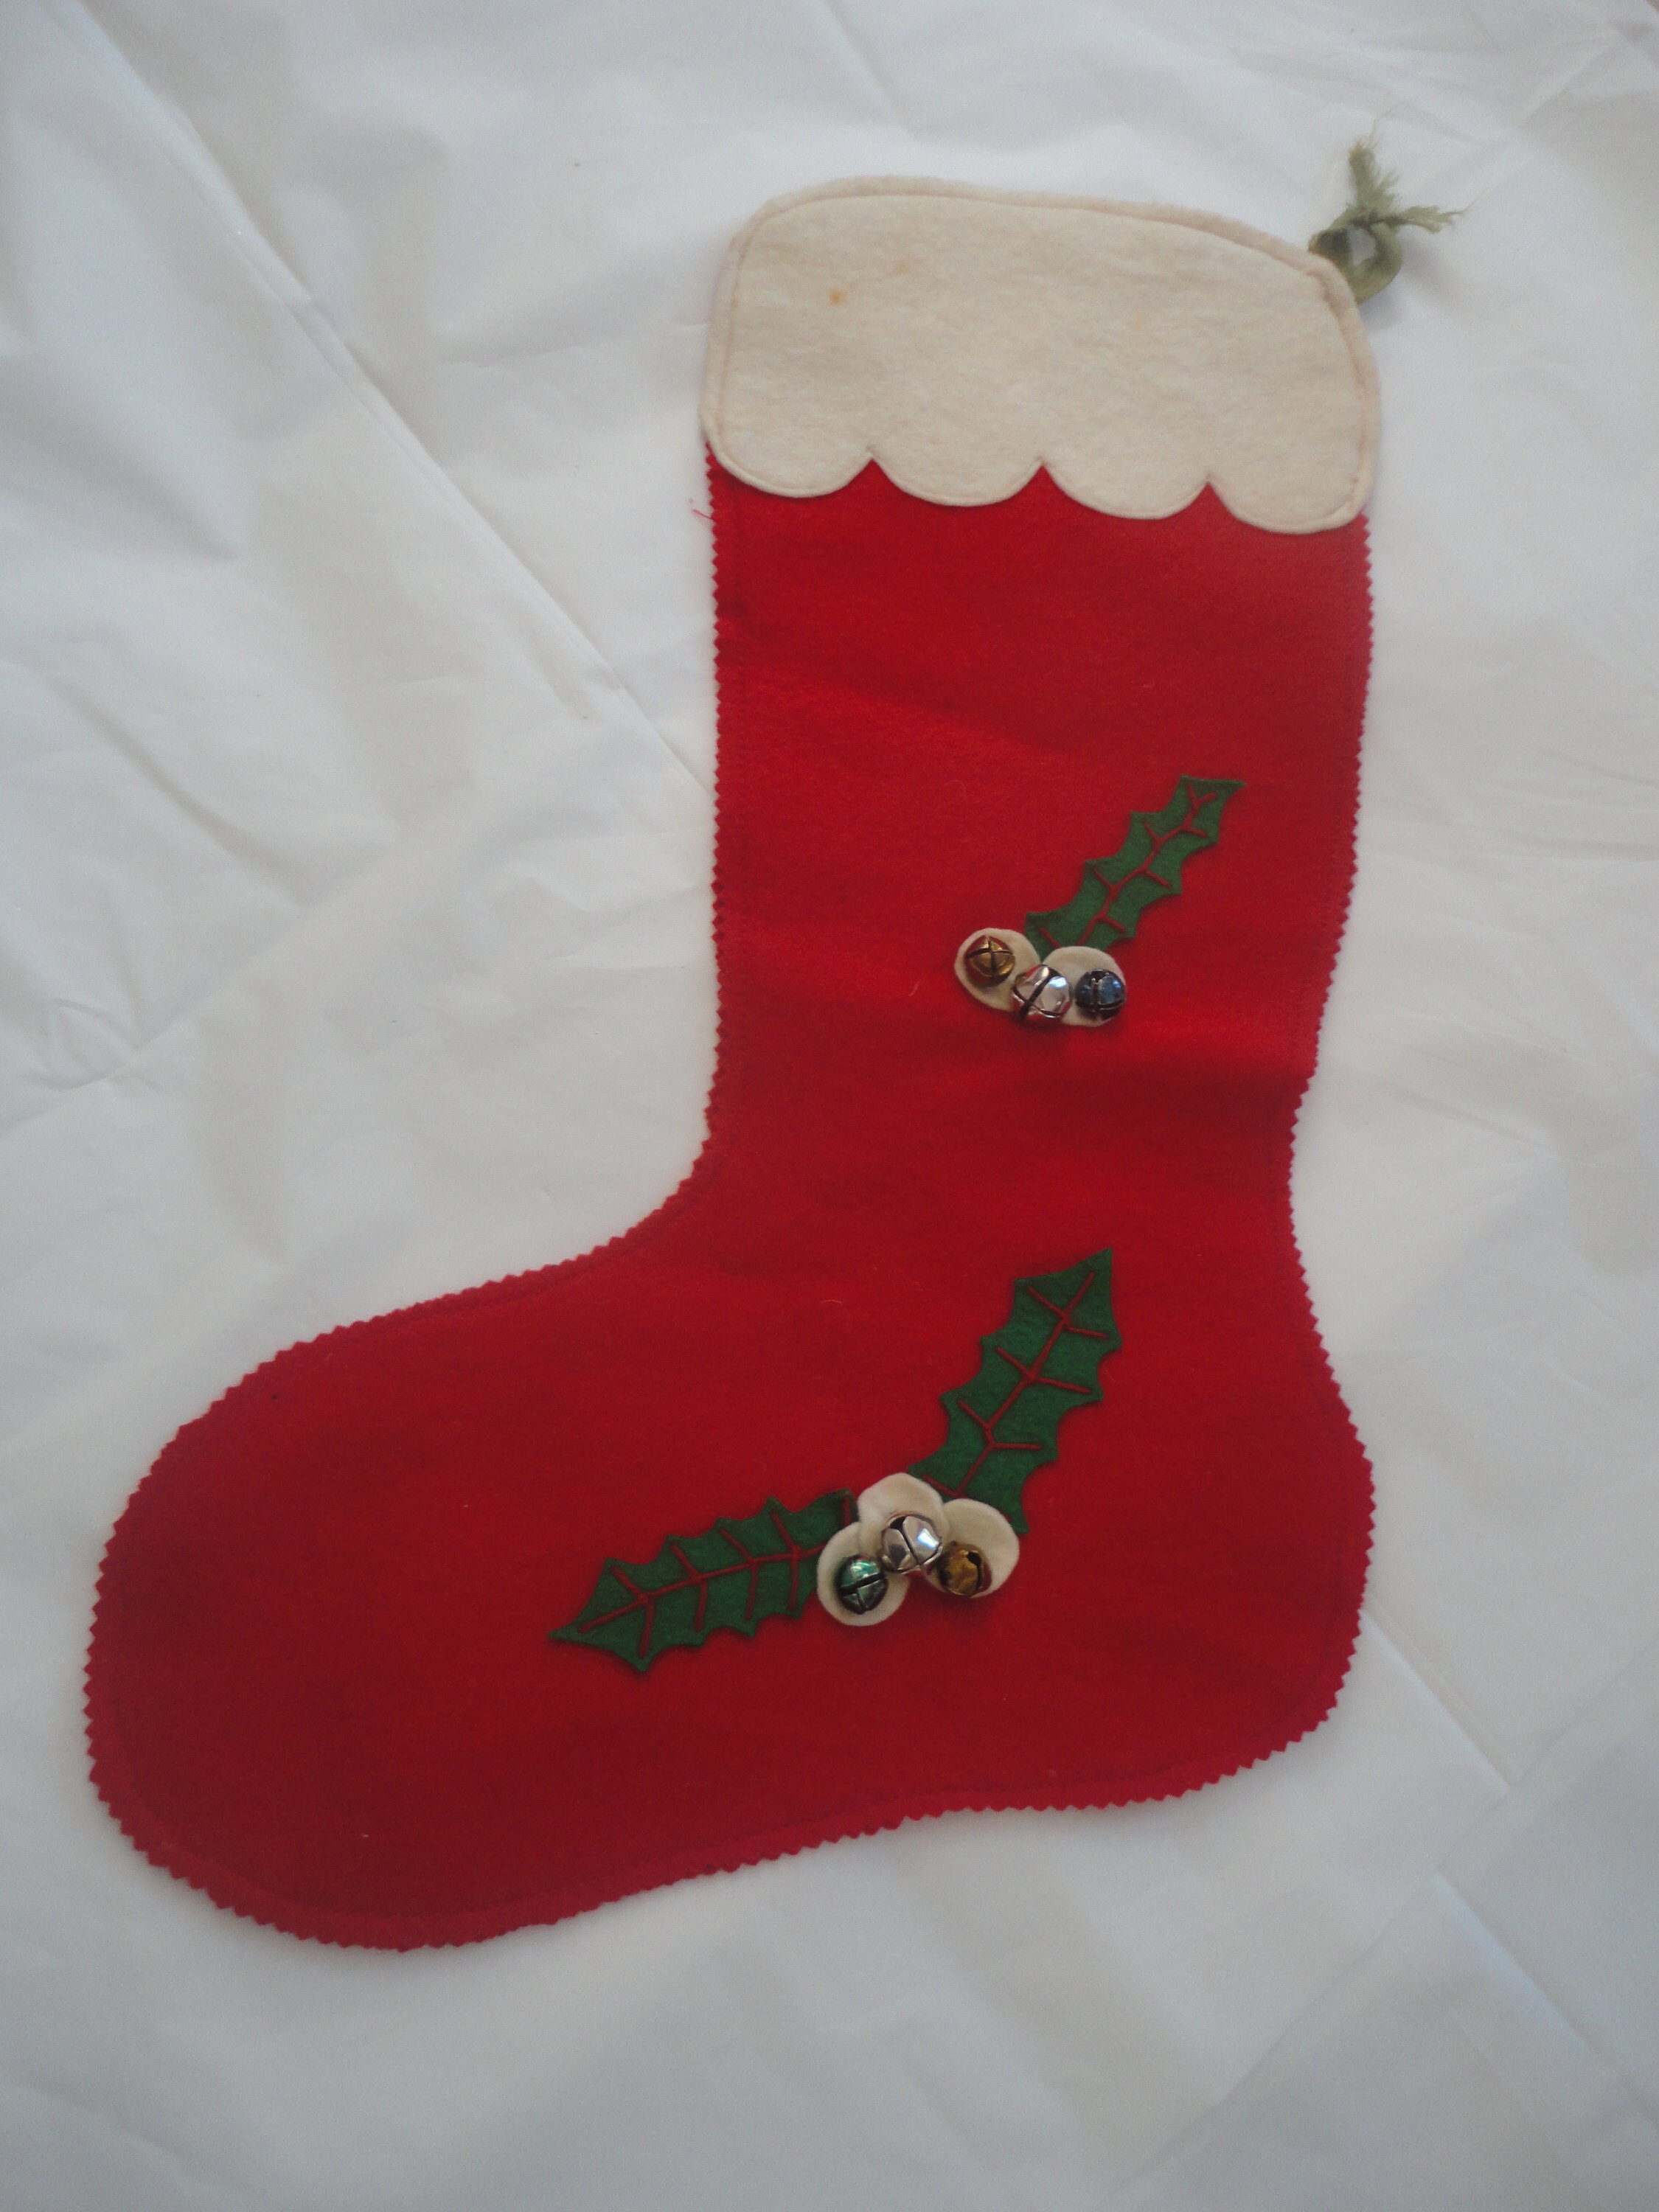 Vintage Red White Felt Christmas Stocking with Holly and Jingle Bells Felt Stocking Christmas Stocking Christmas Stocking Jingle Bells